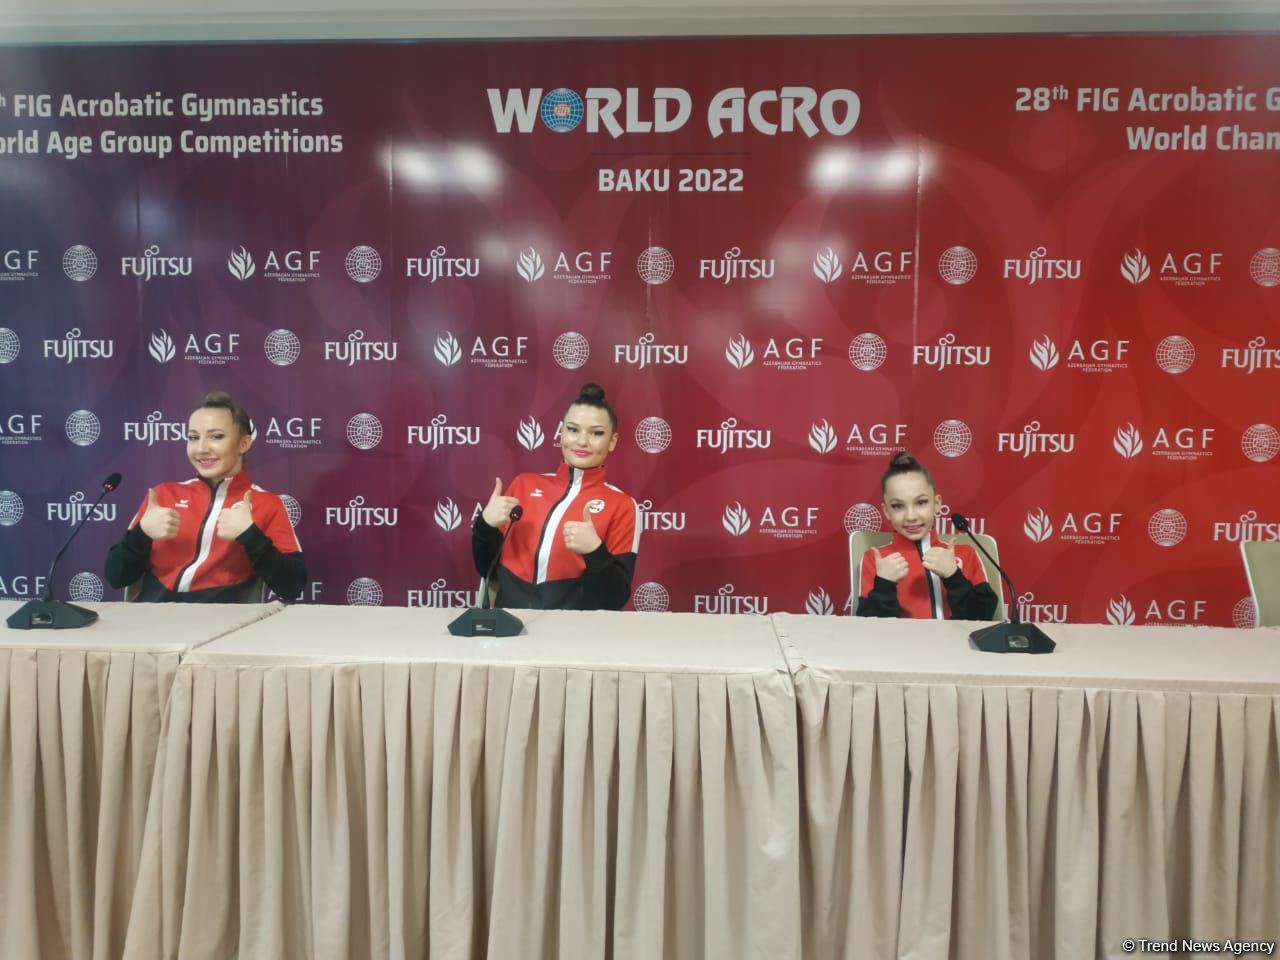 Excellent infrastructure created in Azerbaijan's National Gymnastics Arena - Austrian athletes